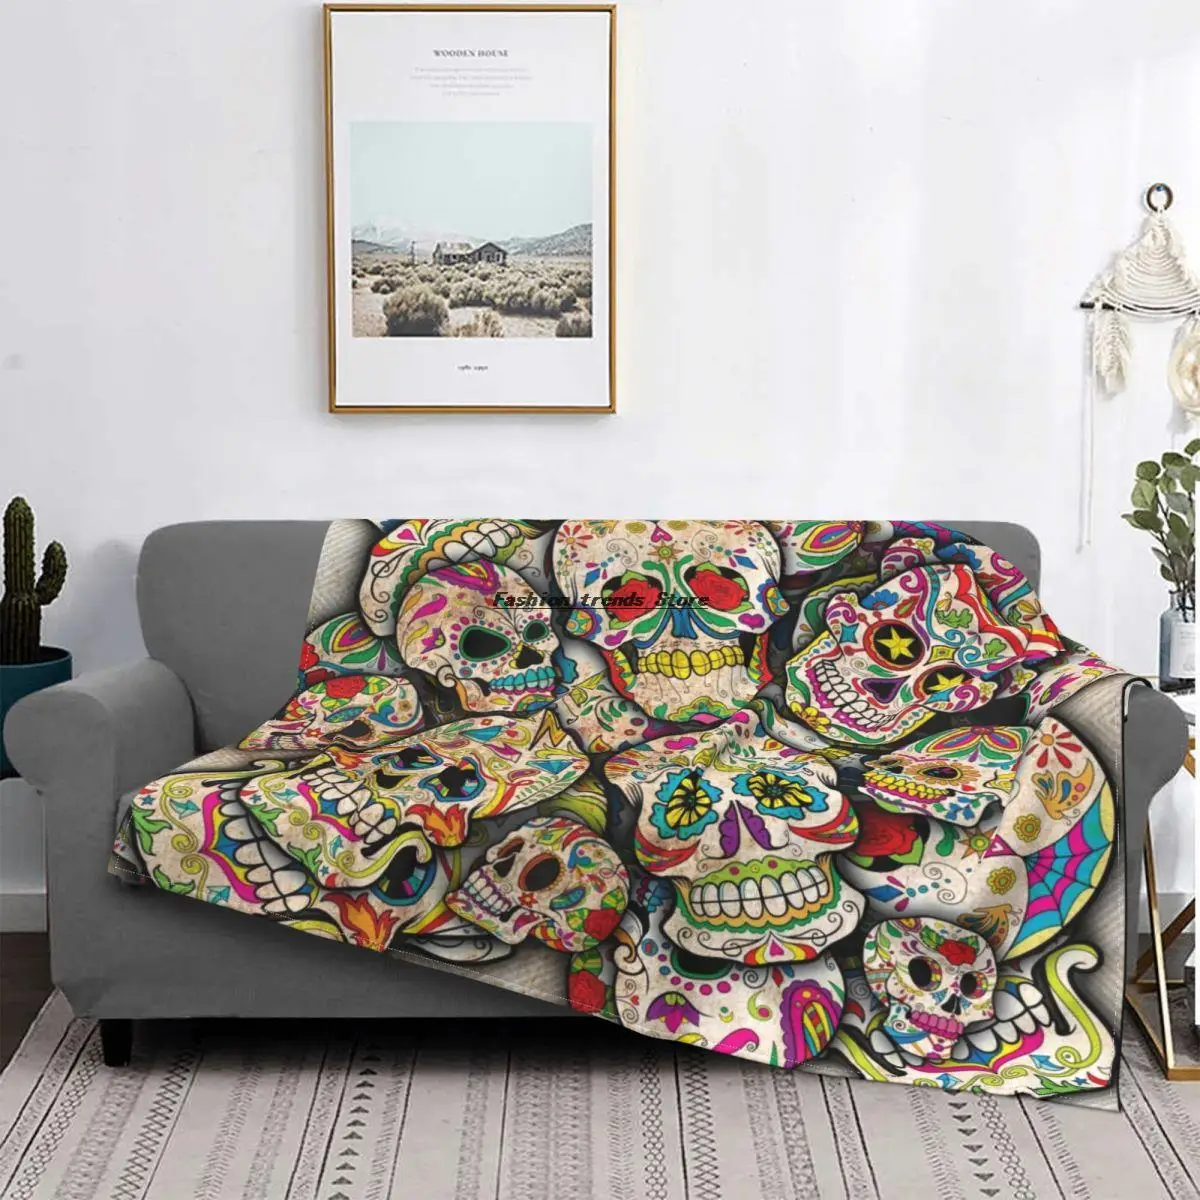 

Sugar Skull Collage Blanket Coral Fleece Plush Printed Horror Scary Super Warm Throw Blankets for Bedding Couch Bedspread